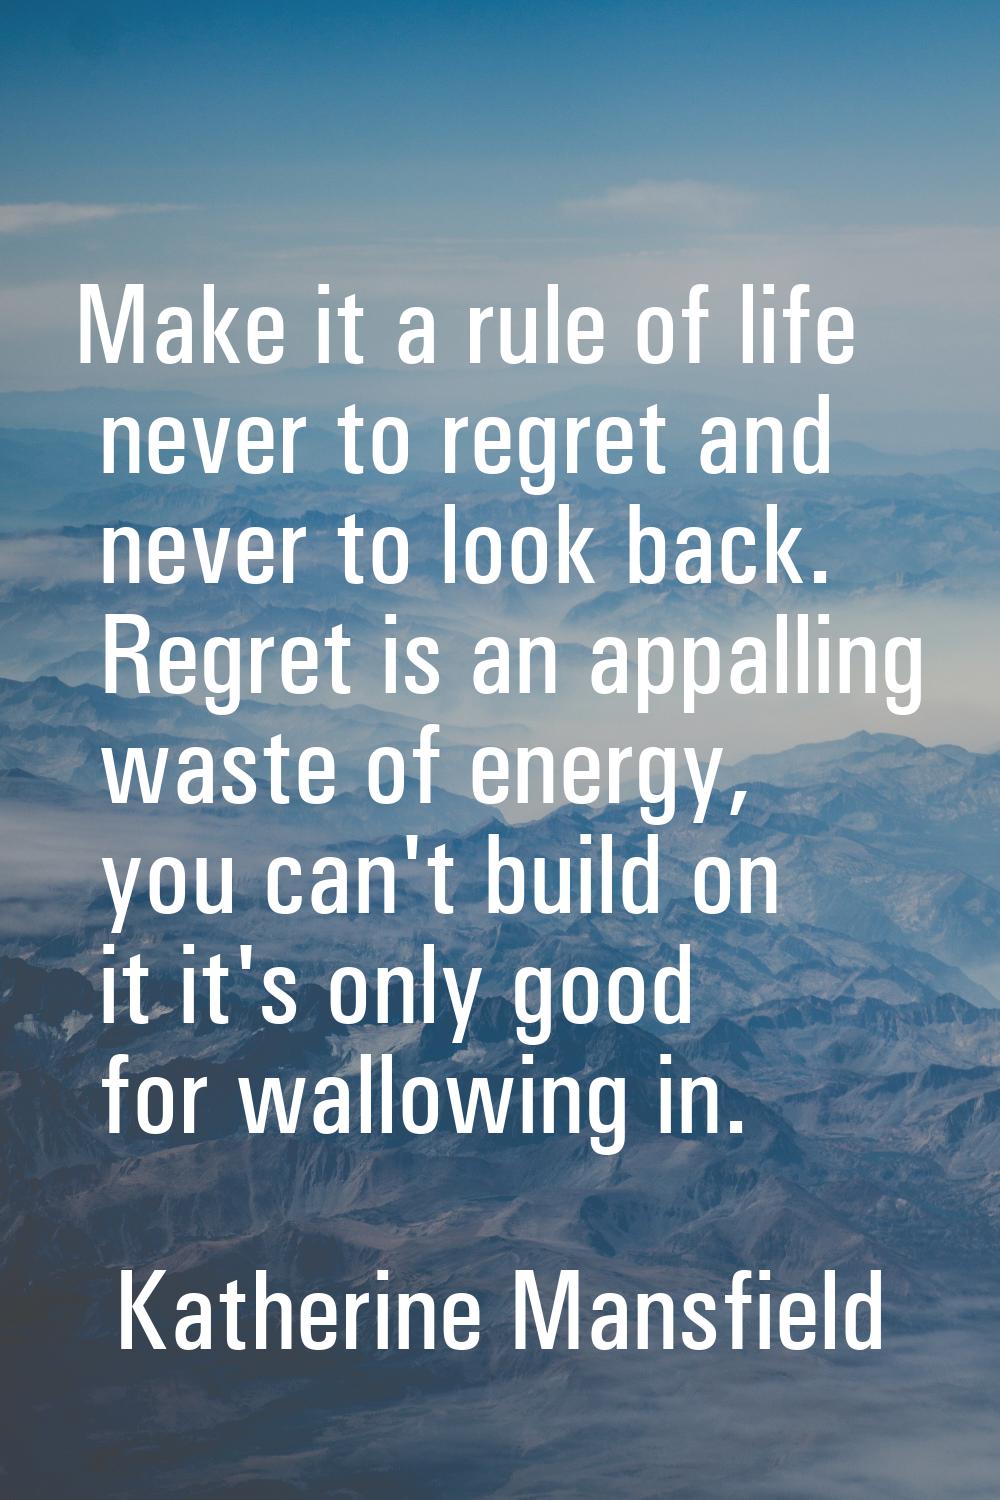 Make it a rule of life never to regret and never to look back. Regret is an appalling waste of ener